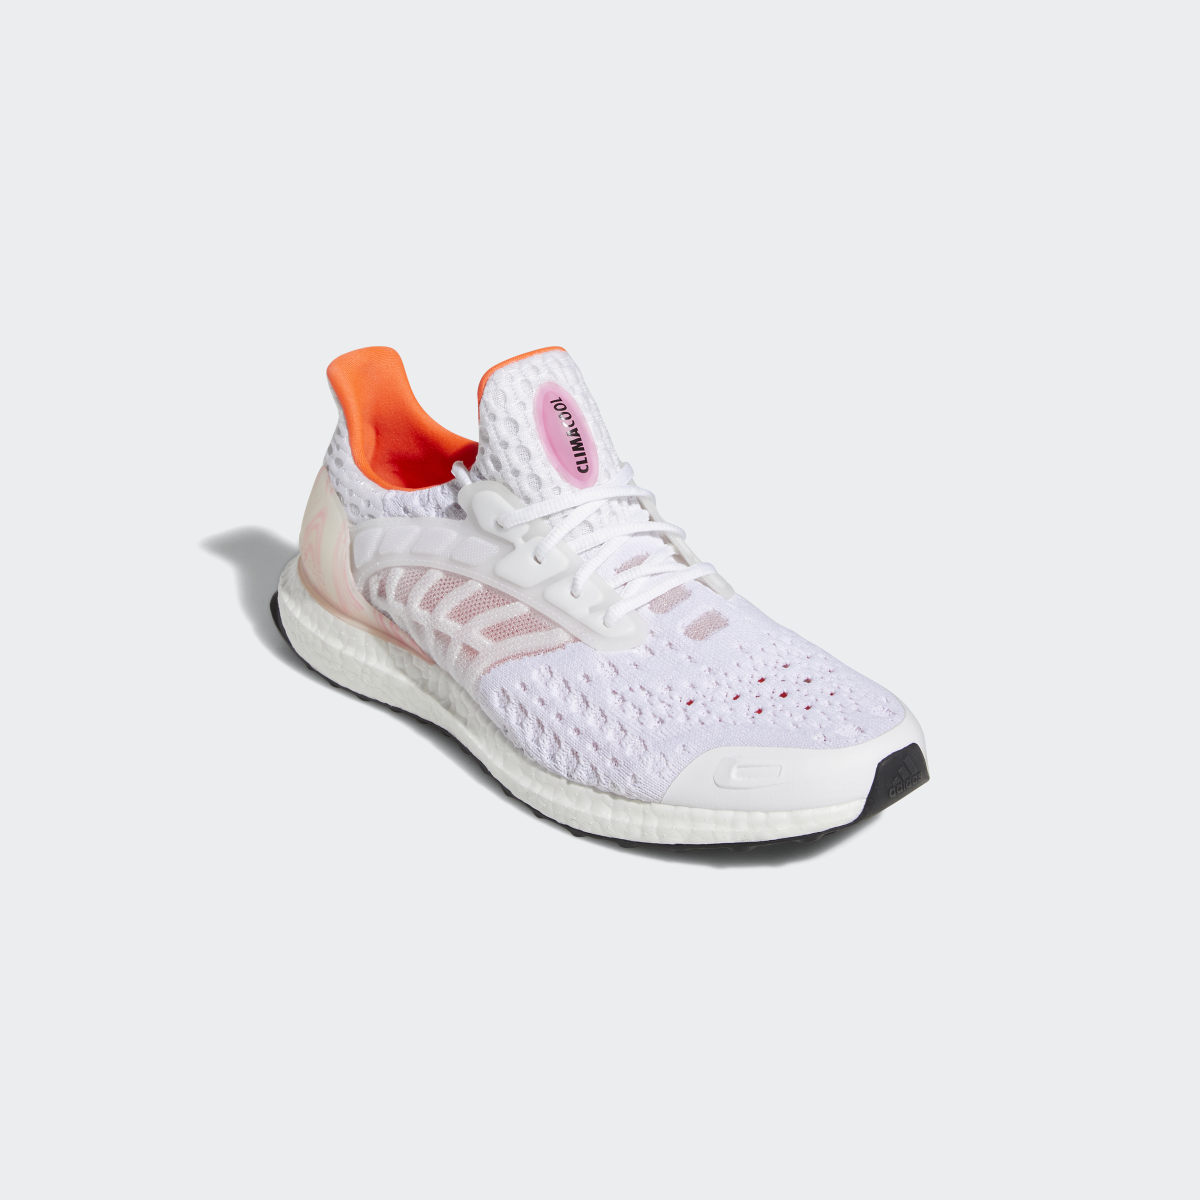 Adidas Ultraboost CC_2 DNA Climacool Running Sportswear Lifestyle Shoes. 8